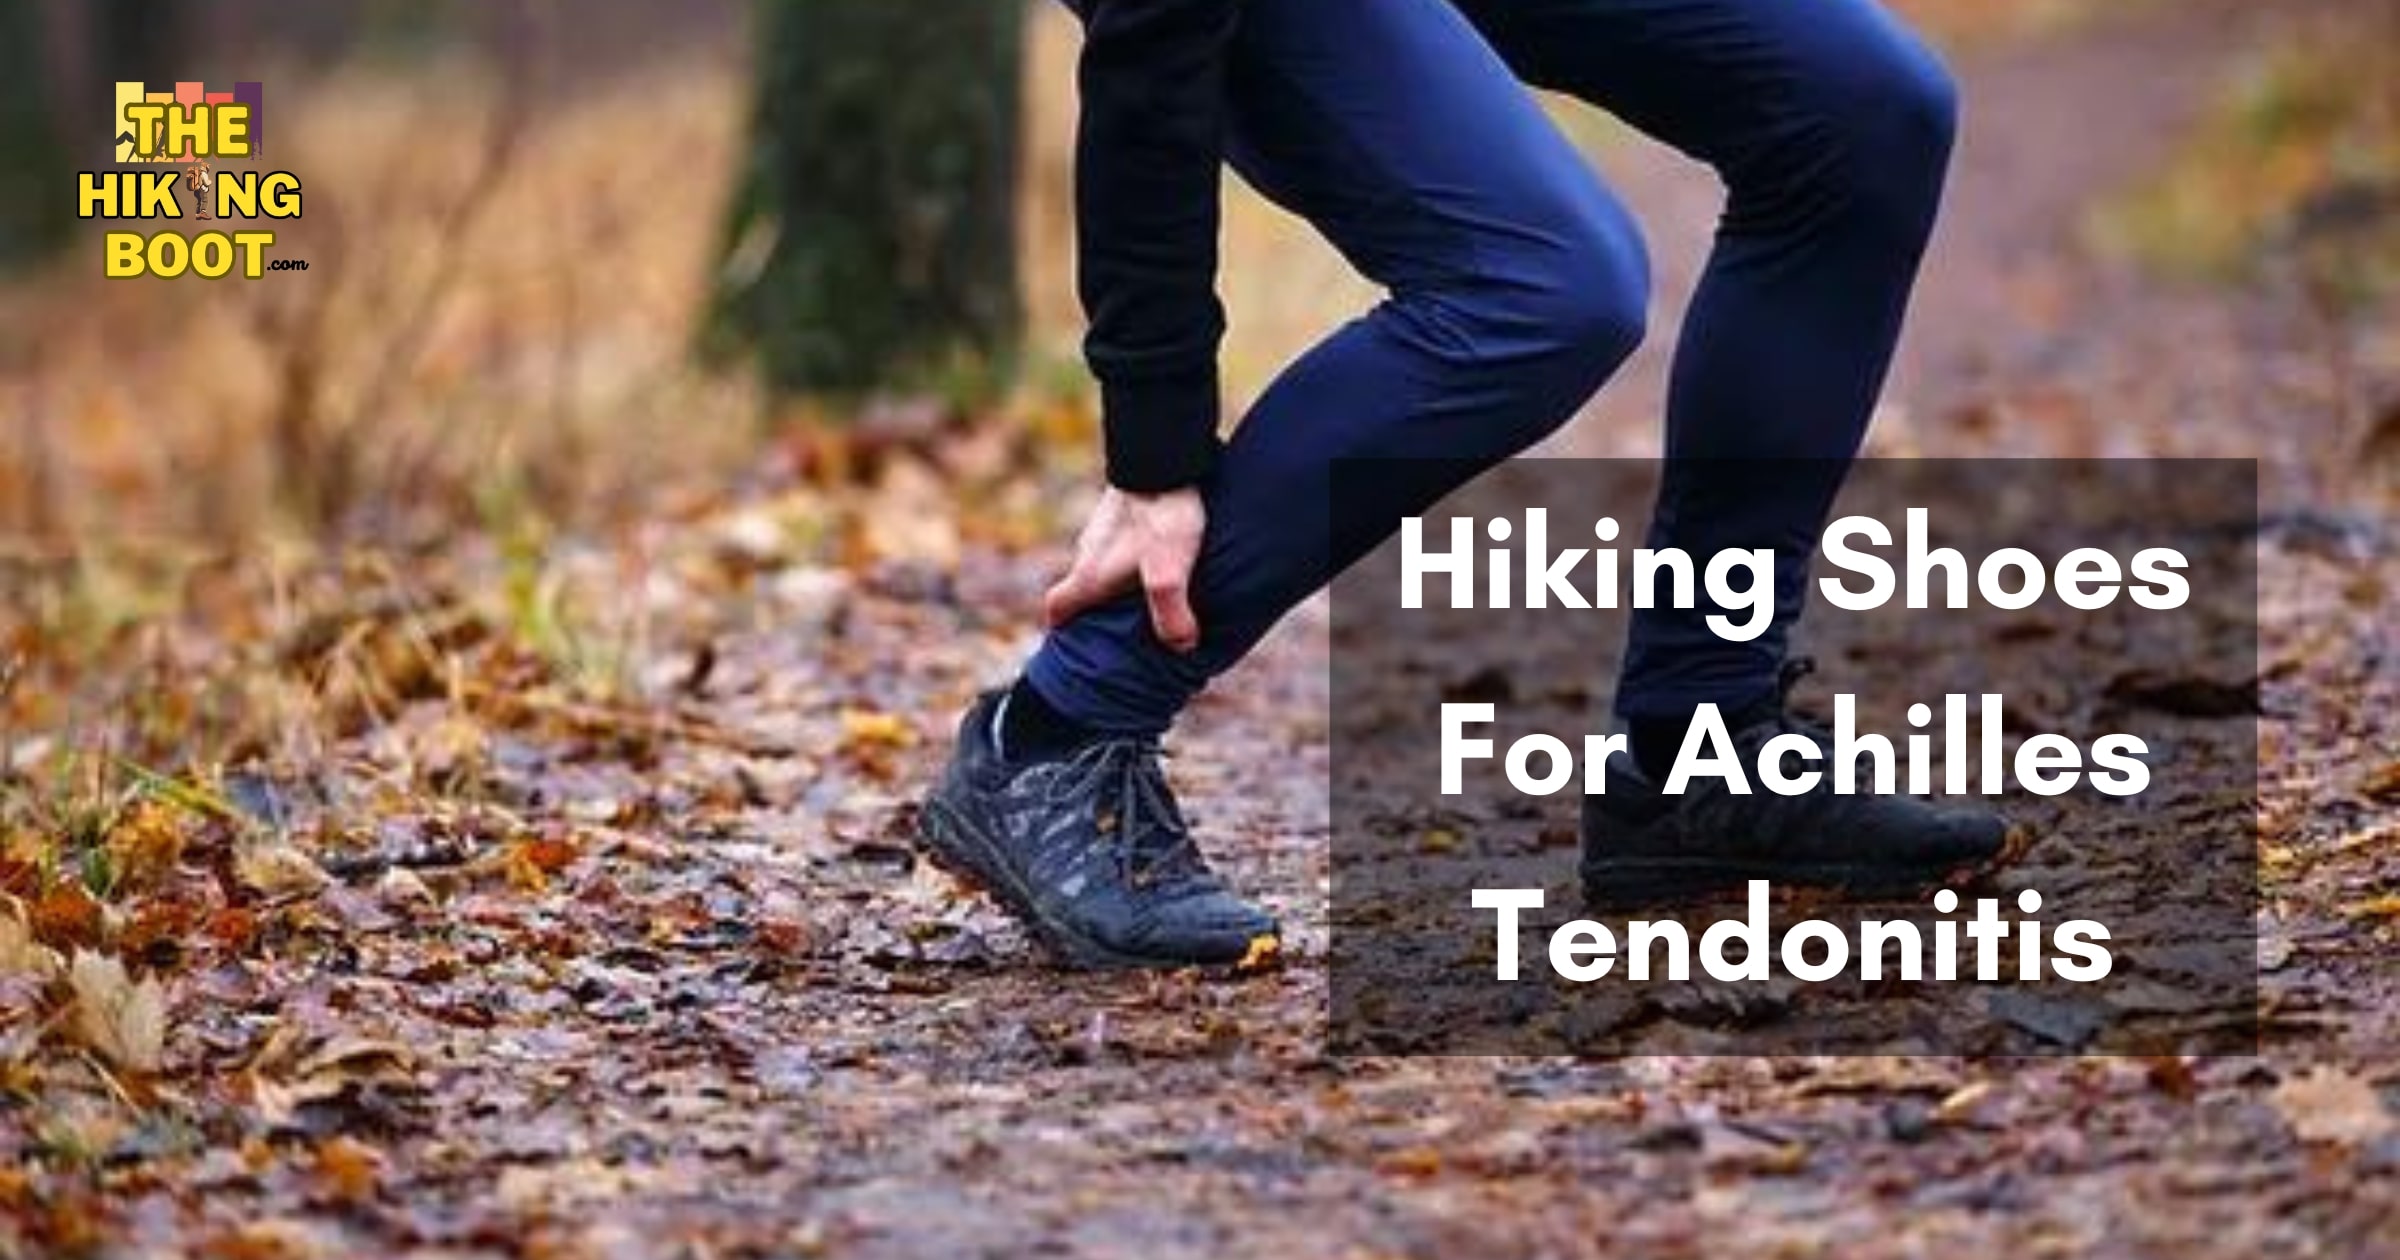 The Ultimate Guide to Hiking Shoes For Achilles Tendonitis